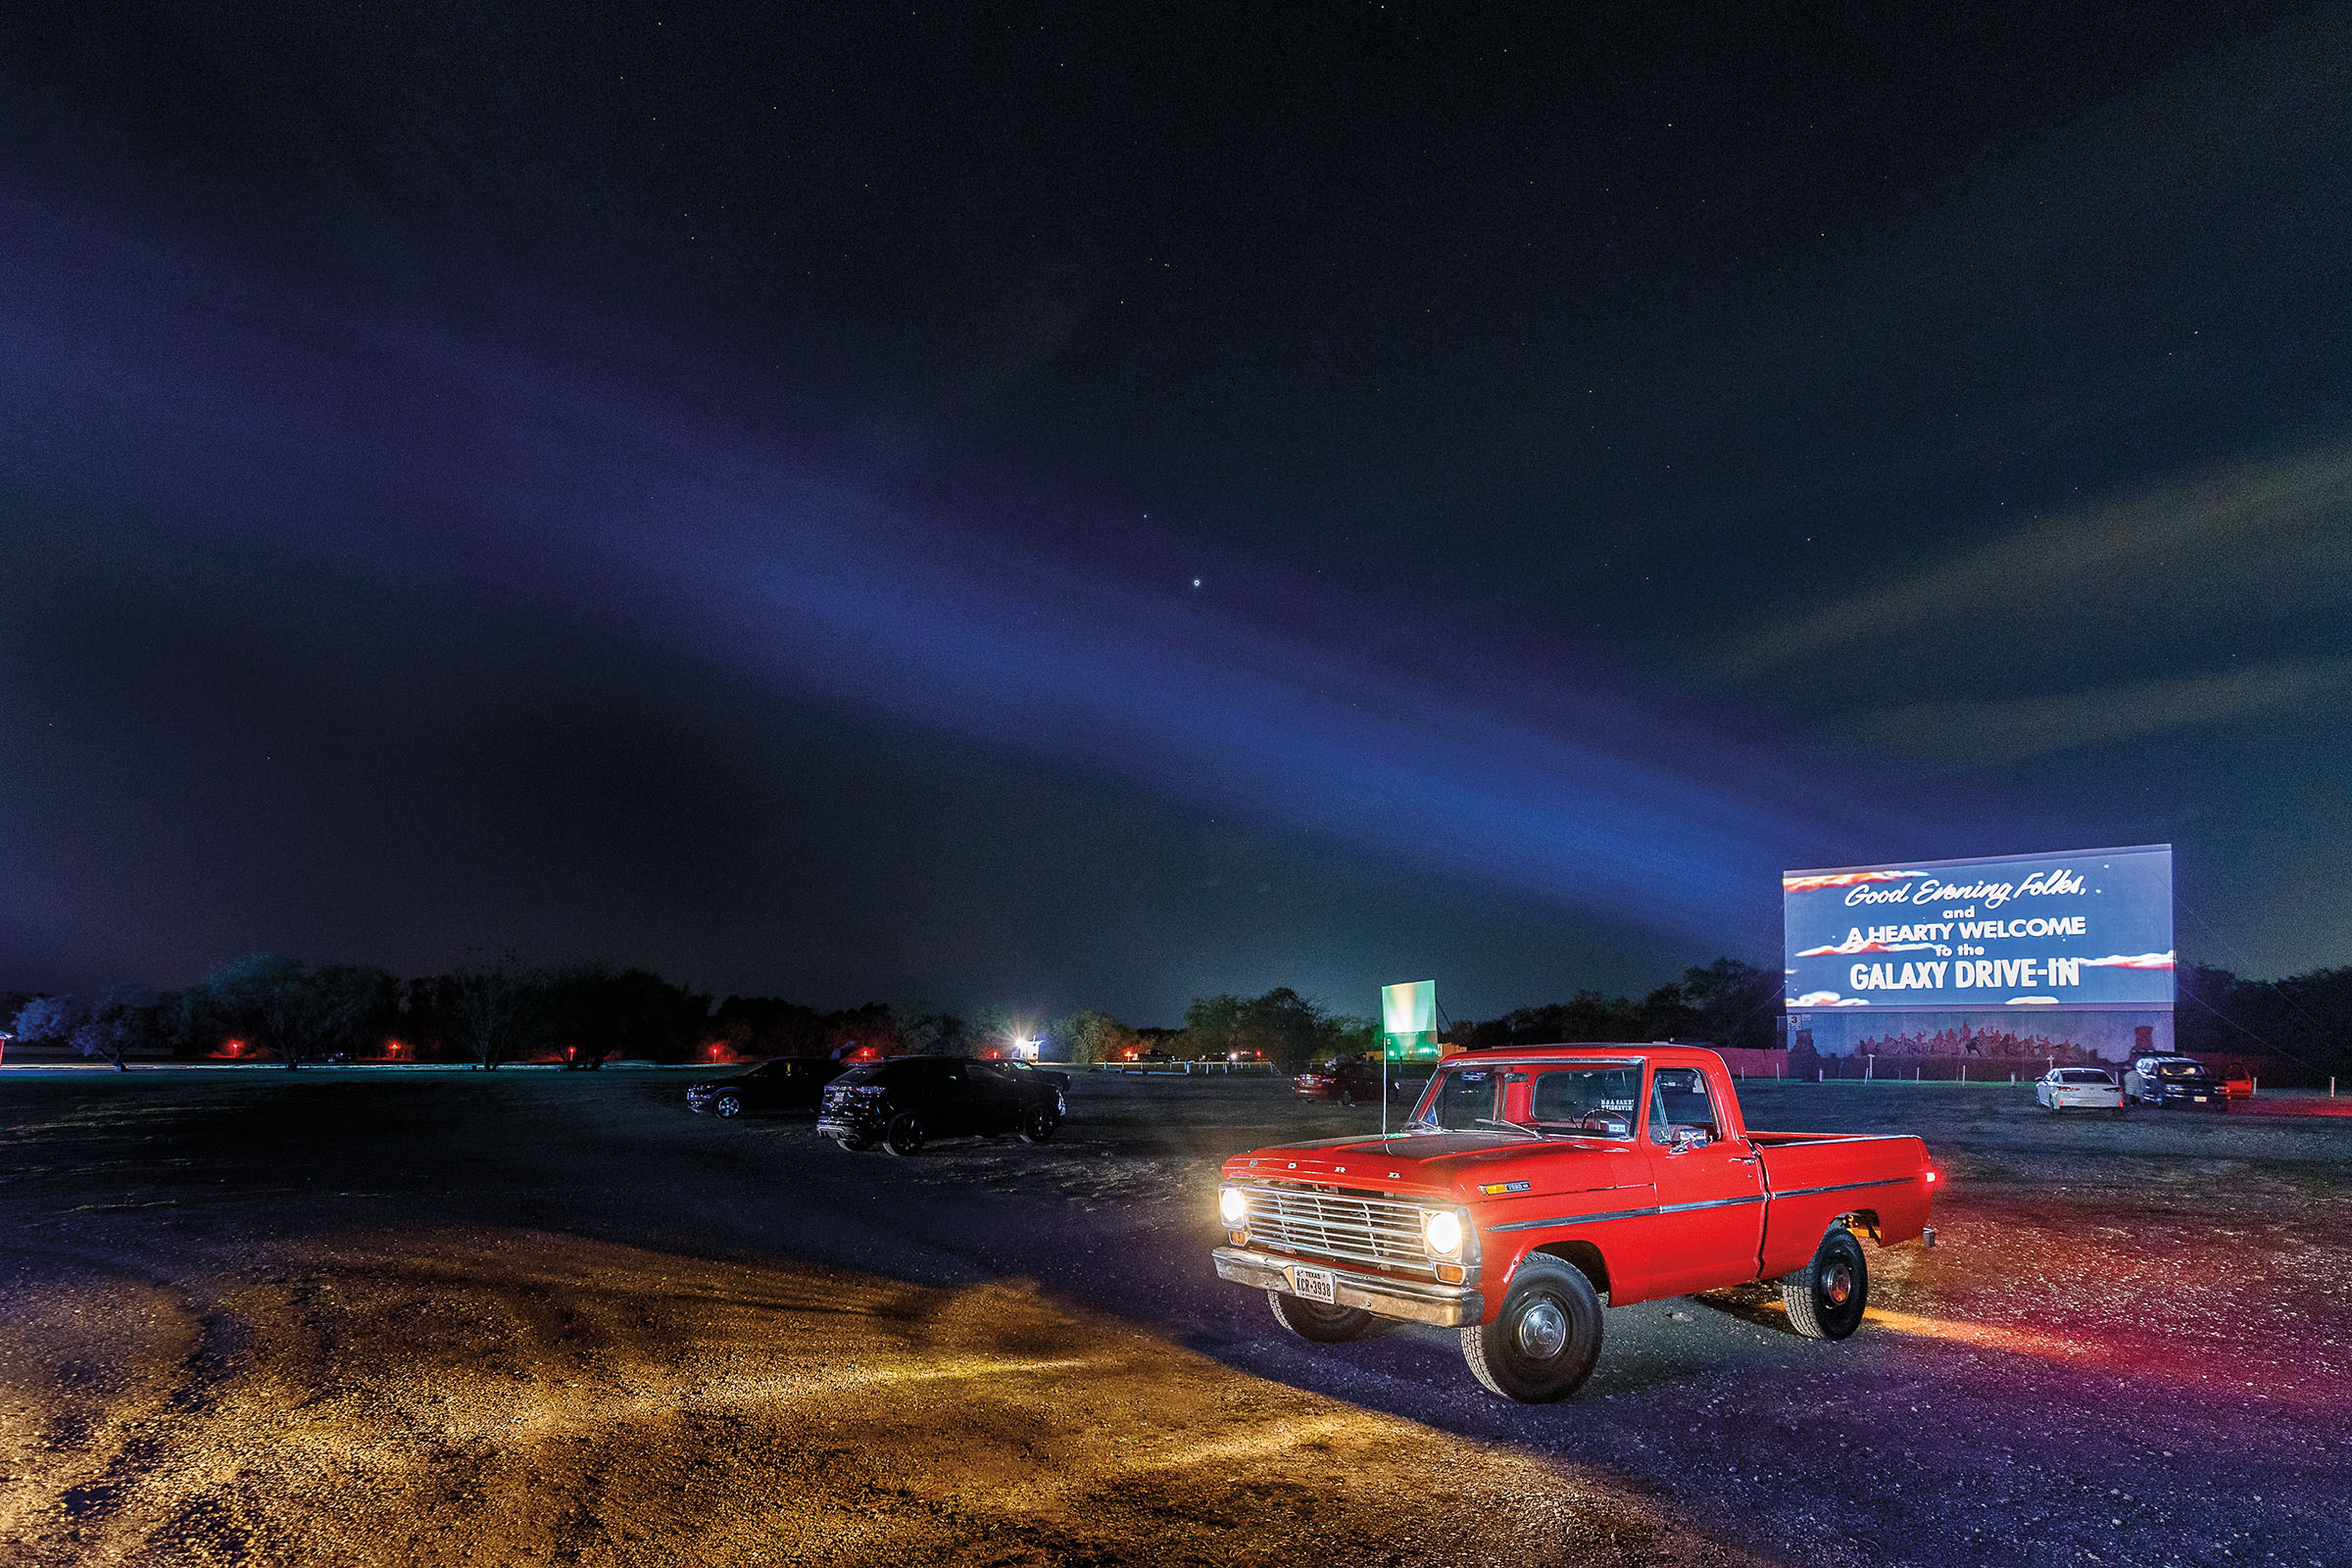 A red ford truck with the headlights on parked at the Galaxy Drive-In, with the large blue movie screen visible in the background